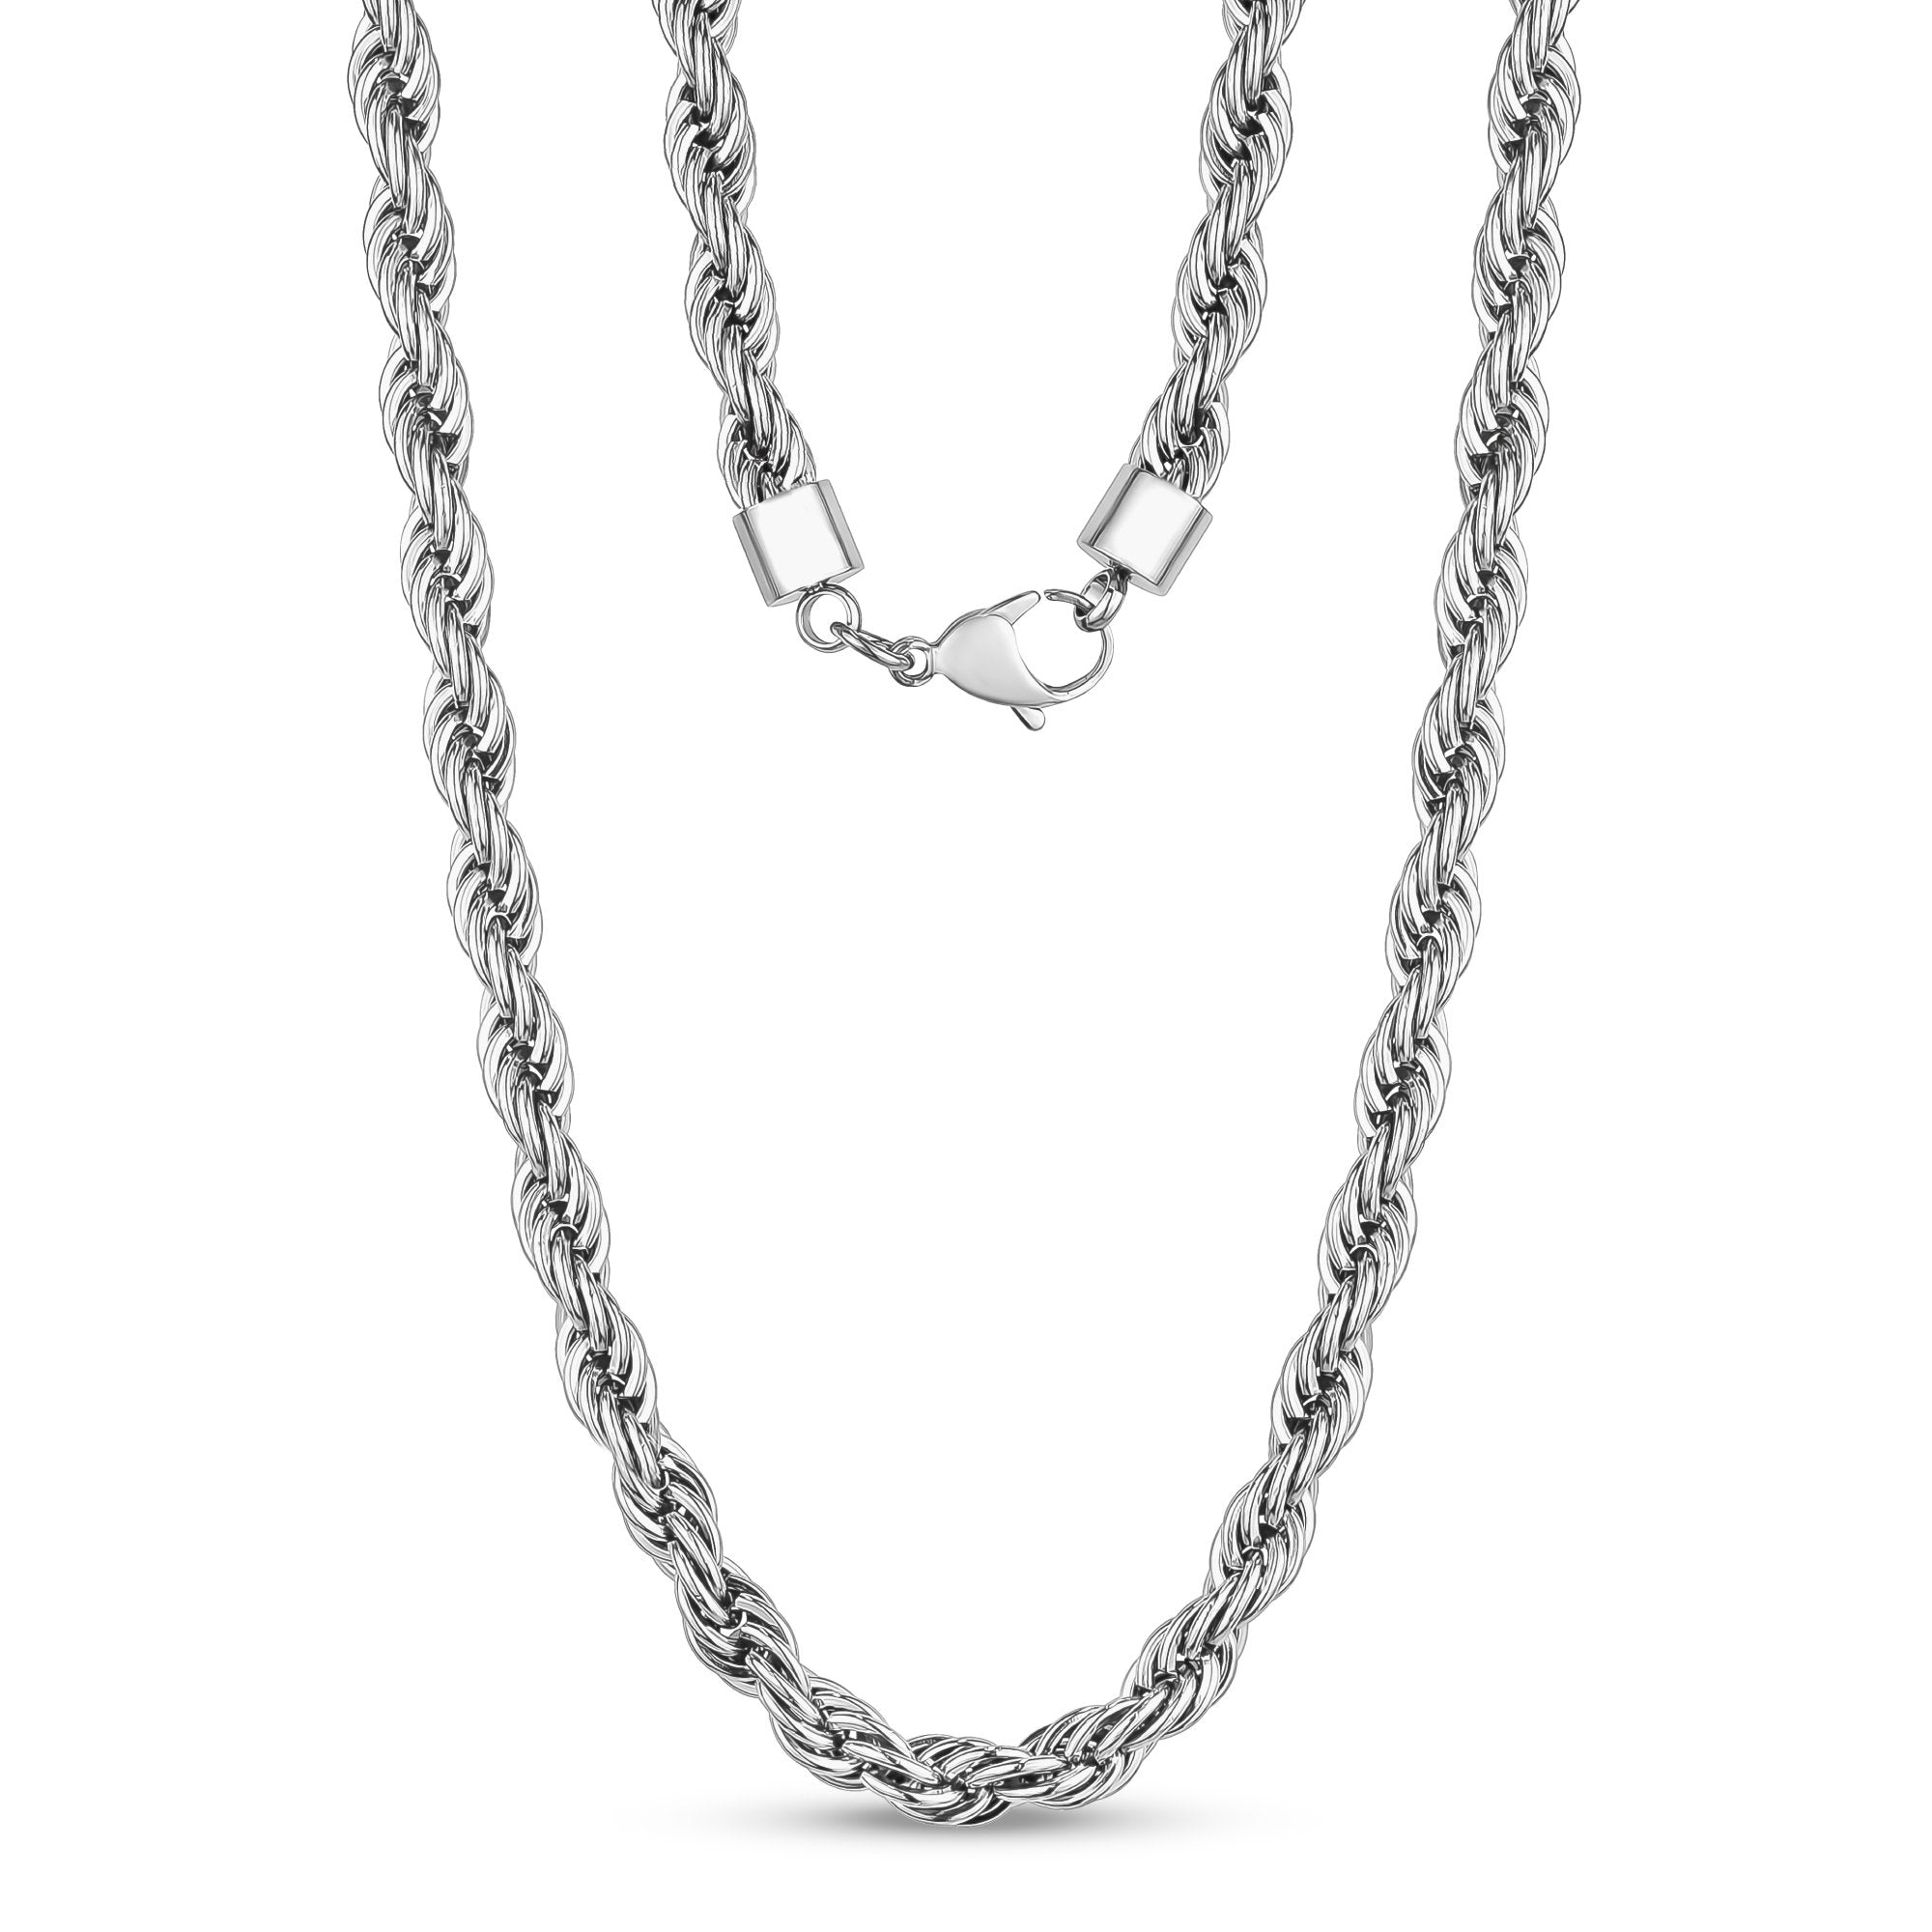 HIYEE Classic Rope Chain Men Necklace / Stainless Steel | Mens chain  necklace, Chain, Men necklace